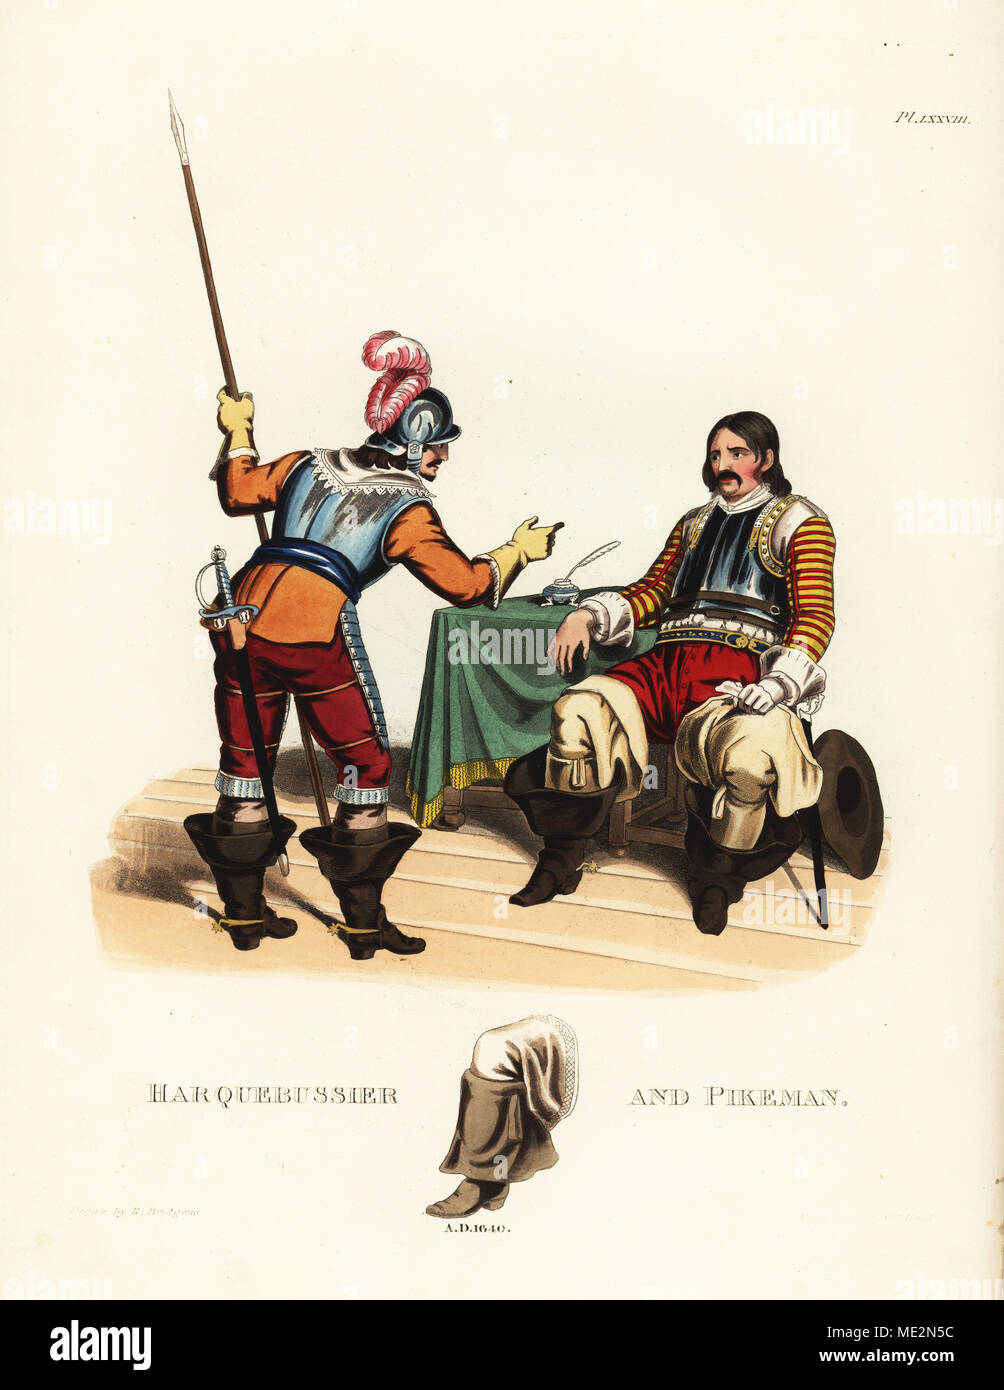 Harquebussier and pikeman, 1640. Pikeman in helmet and cuirass, doublet, breeches, boots, holding a pike. Officer of pistoliers in cuirass, doublet, breeches, boots with large linen guards. Handcoloured lithograph by Maddocks after an illustration by S.R. Meyrick from Sir Samuel Rush Meyrick's A Critical Inquiry into Antient Armour, John Dowding, London, 1842. Stock Photo